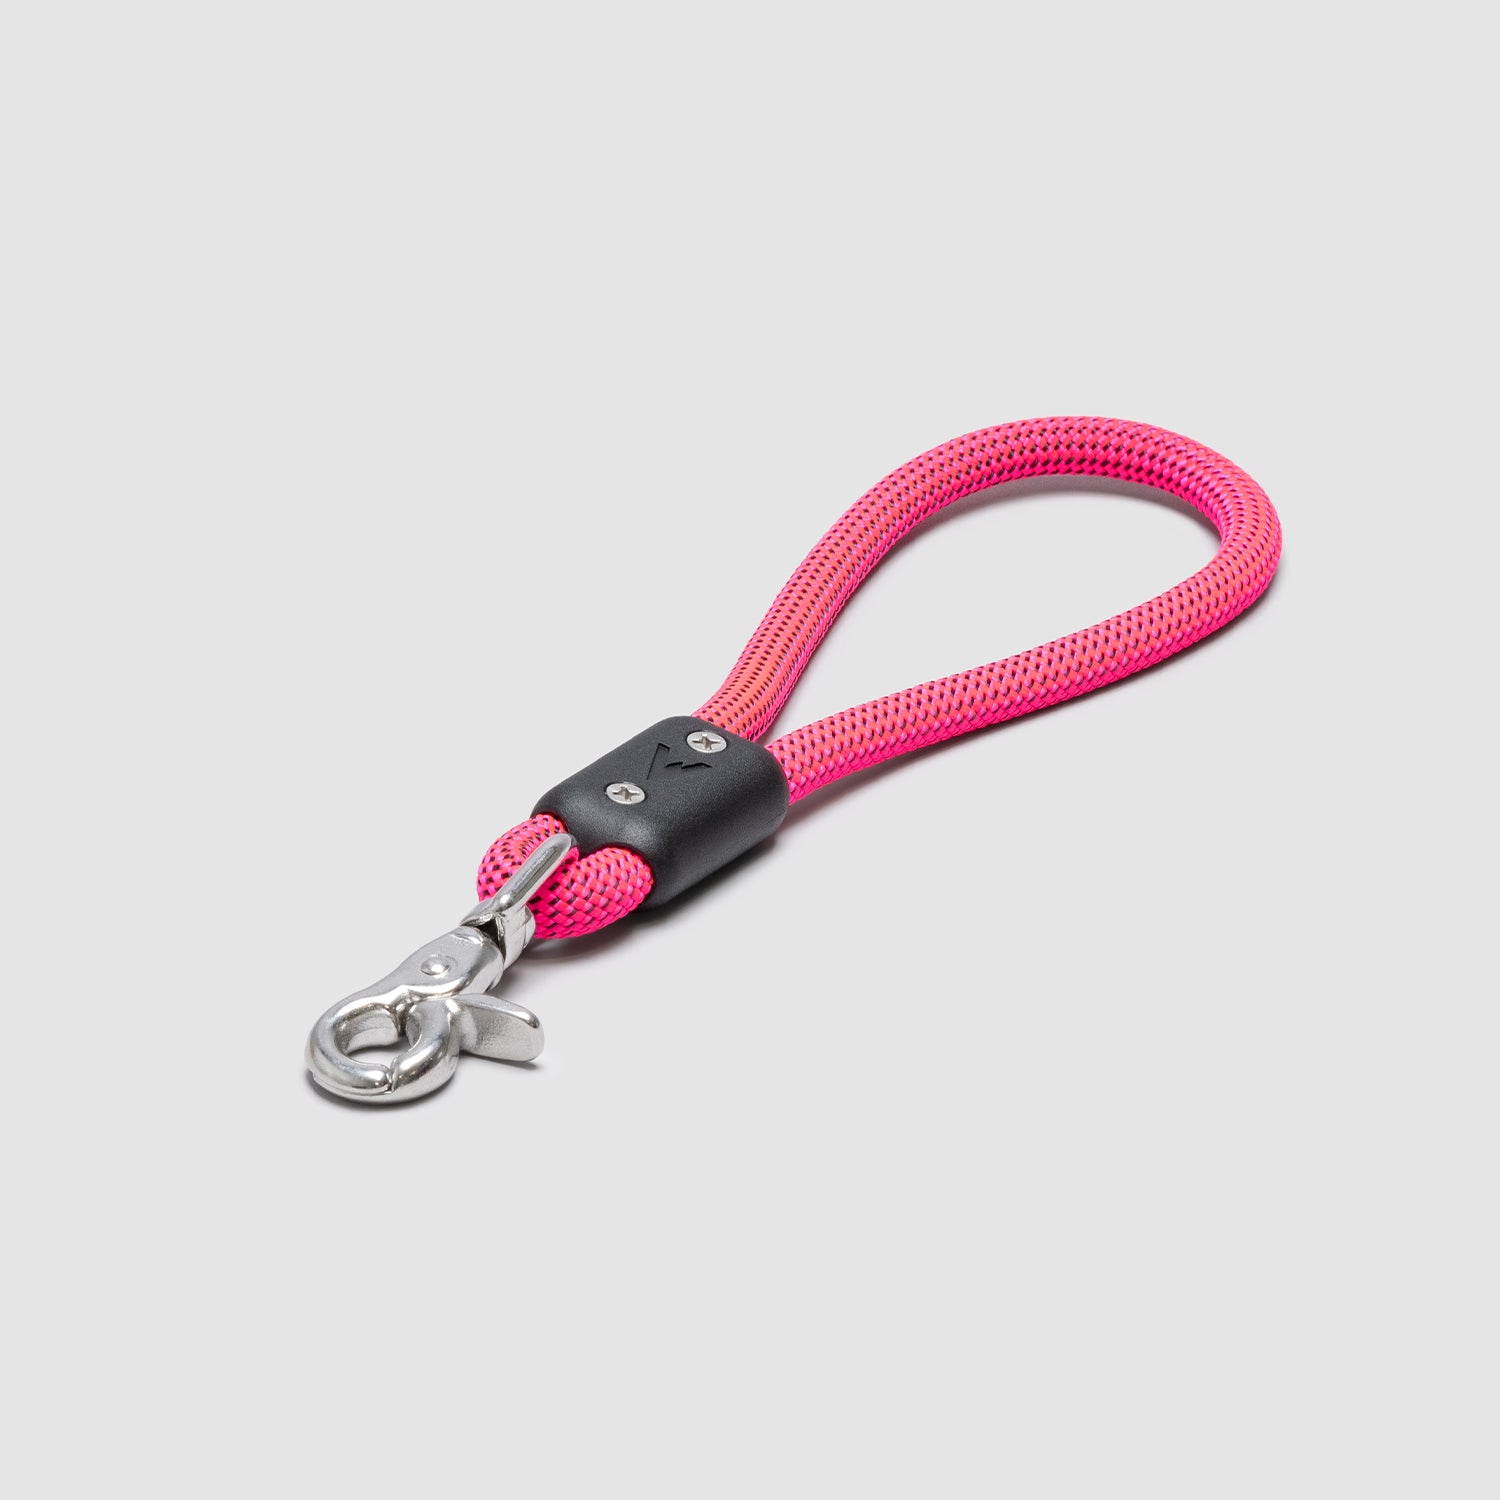 atlas pet company lifetime handle climbing rope lifetime warranty trail handle for active dogs --pink